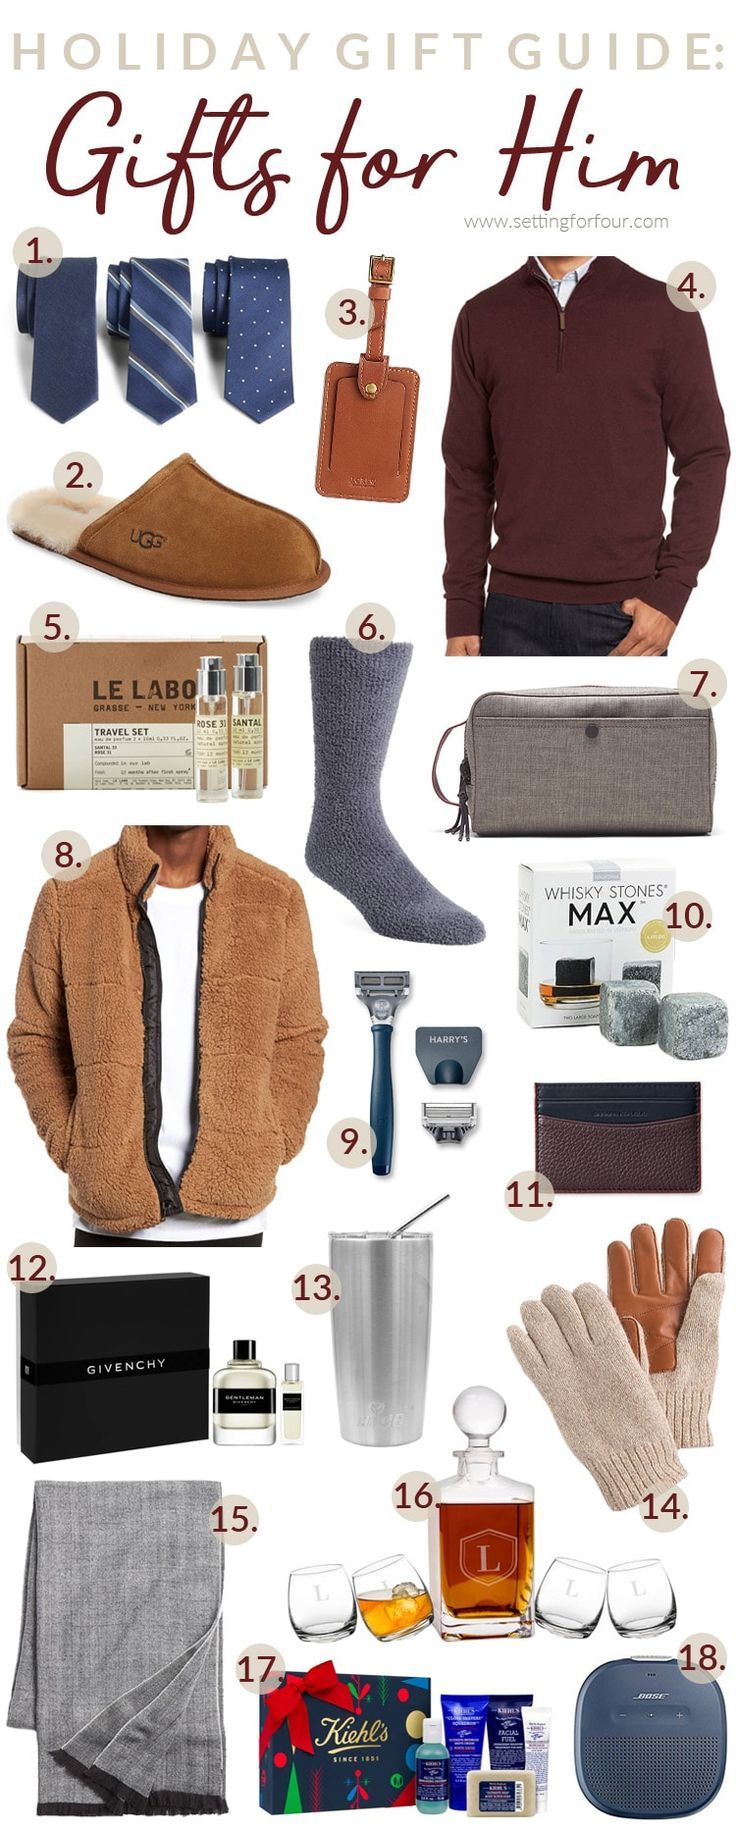 Holiday Gift Guide - Gifts For Him